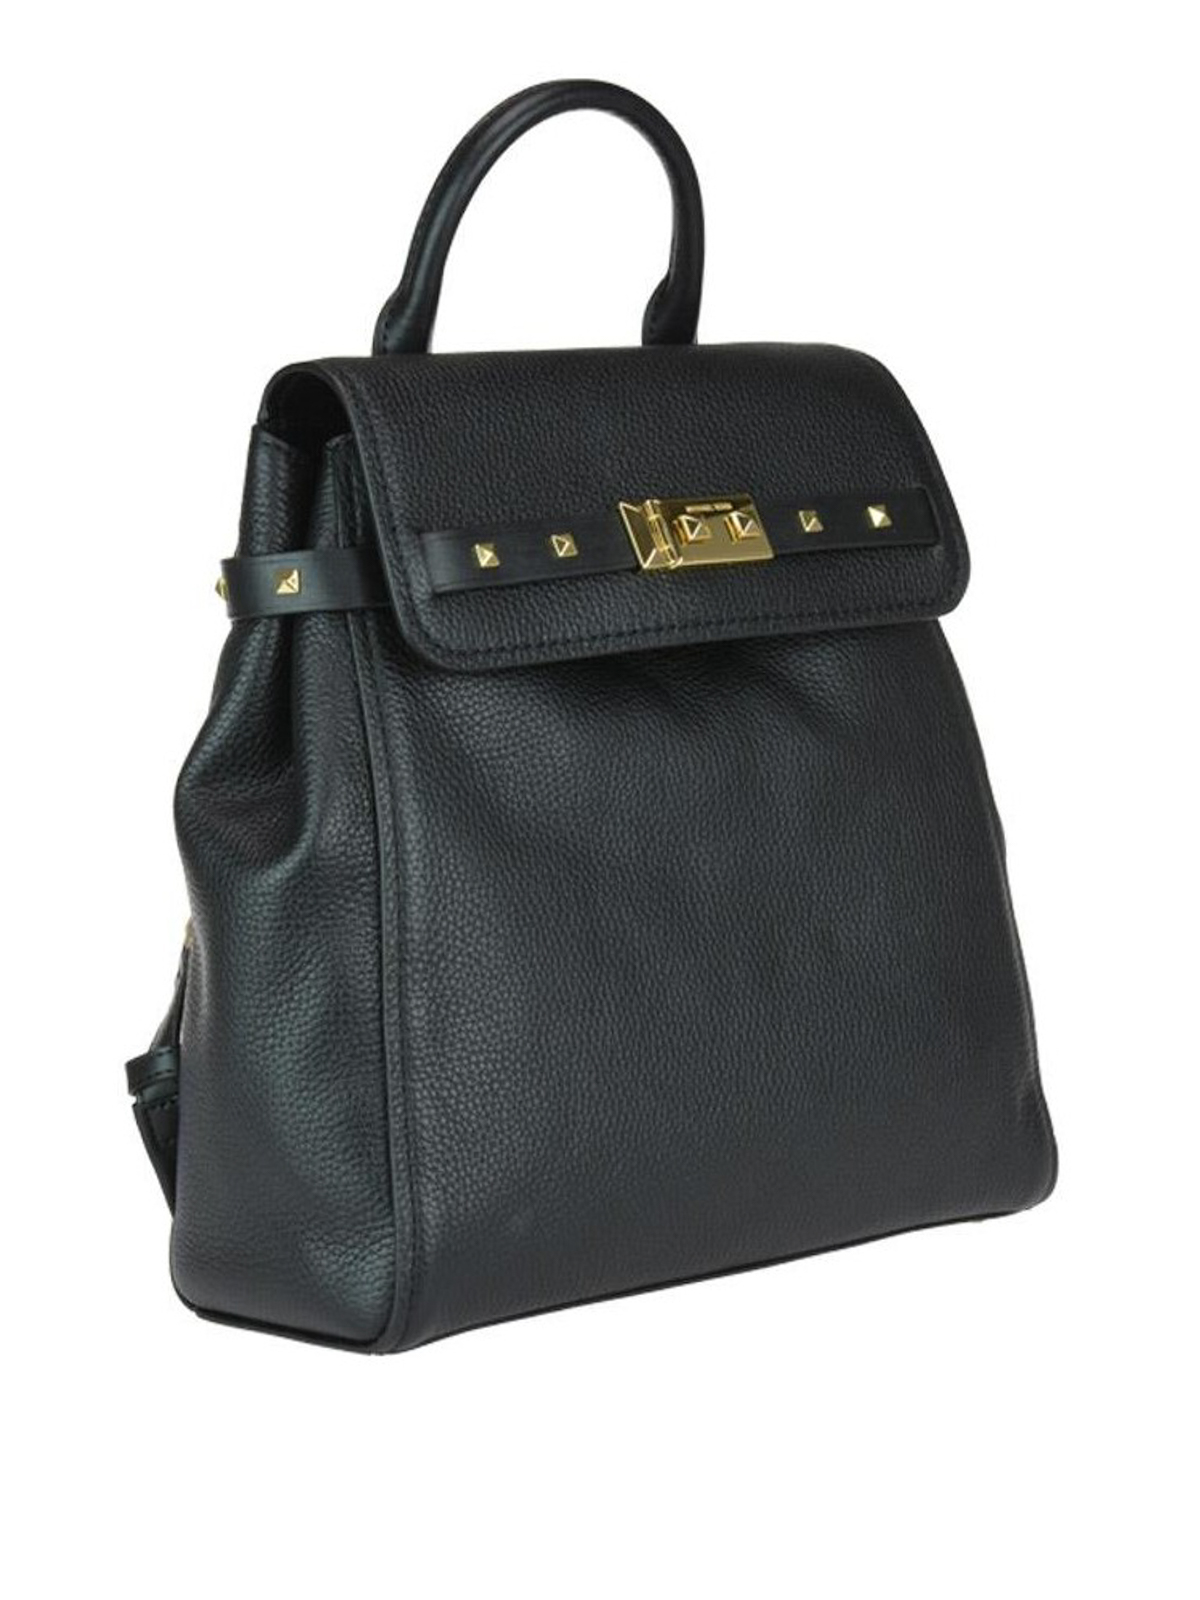 Backpacks Michael Kors - Addison black grained leather backpack -  30T8GZFB2L001